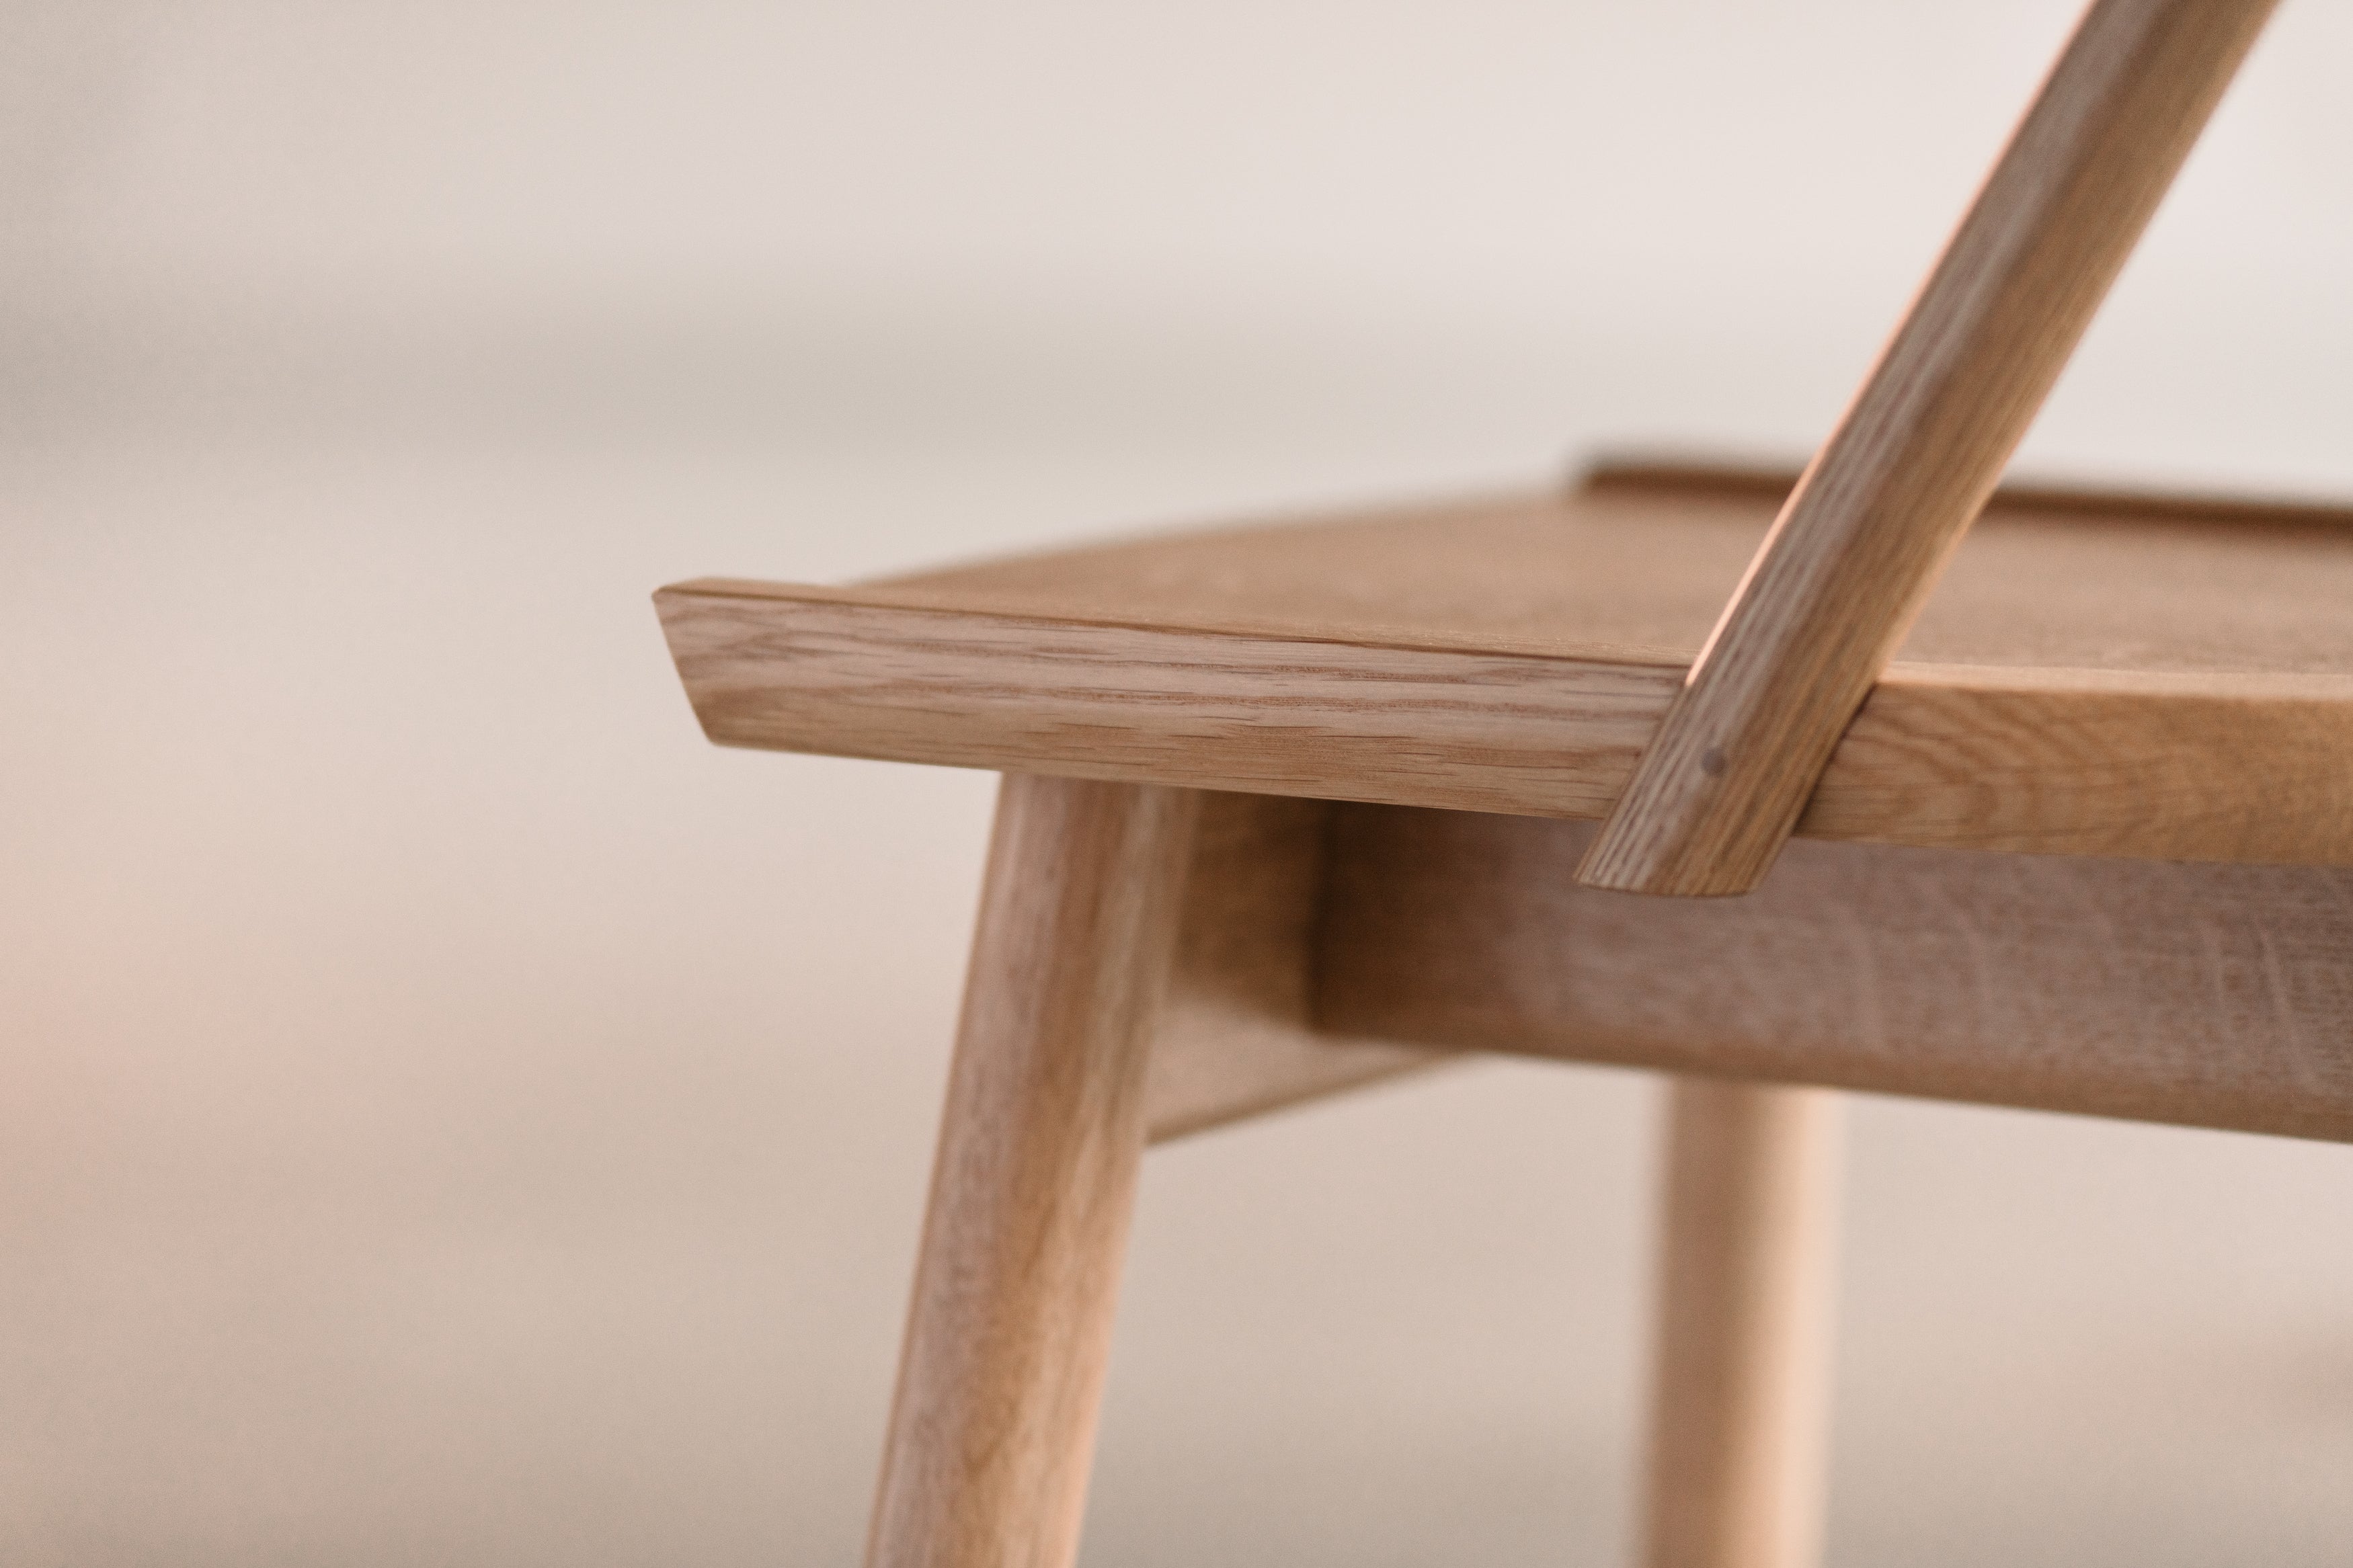 Close up details of the overlapping bow on the white oak Atlas Chair from Chilton Furniture in Maine